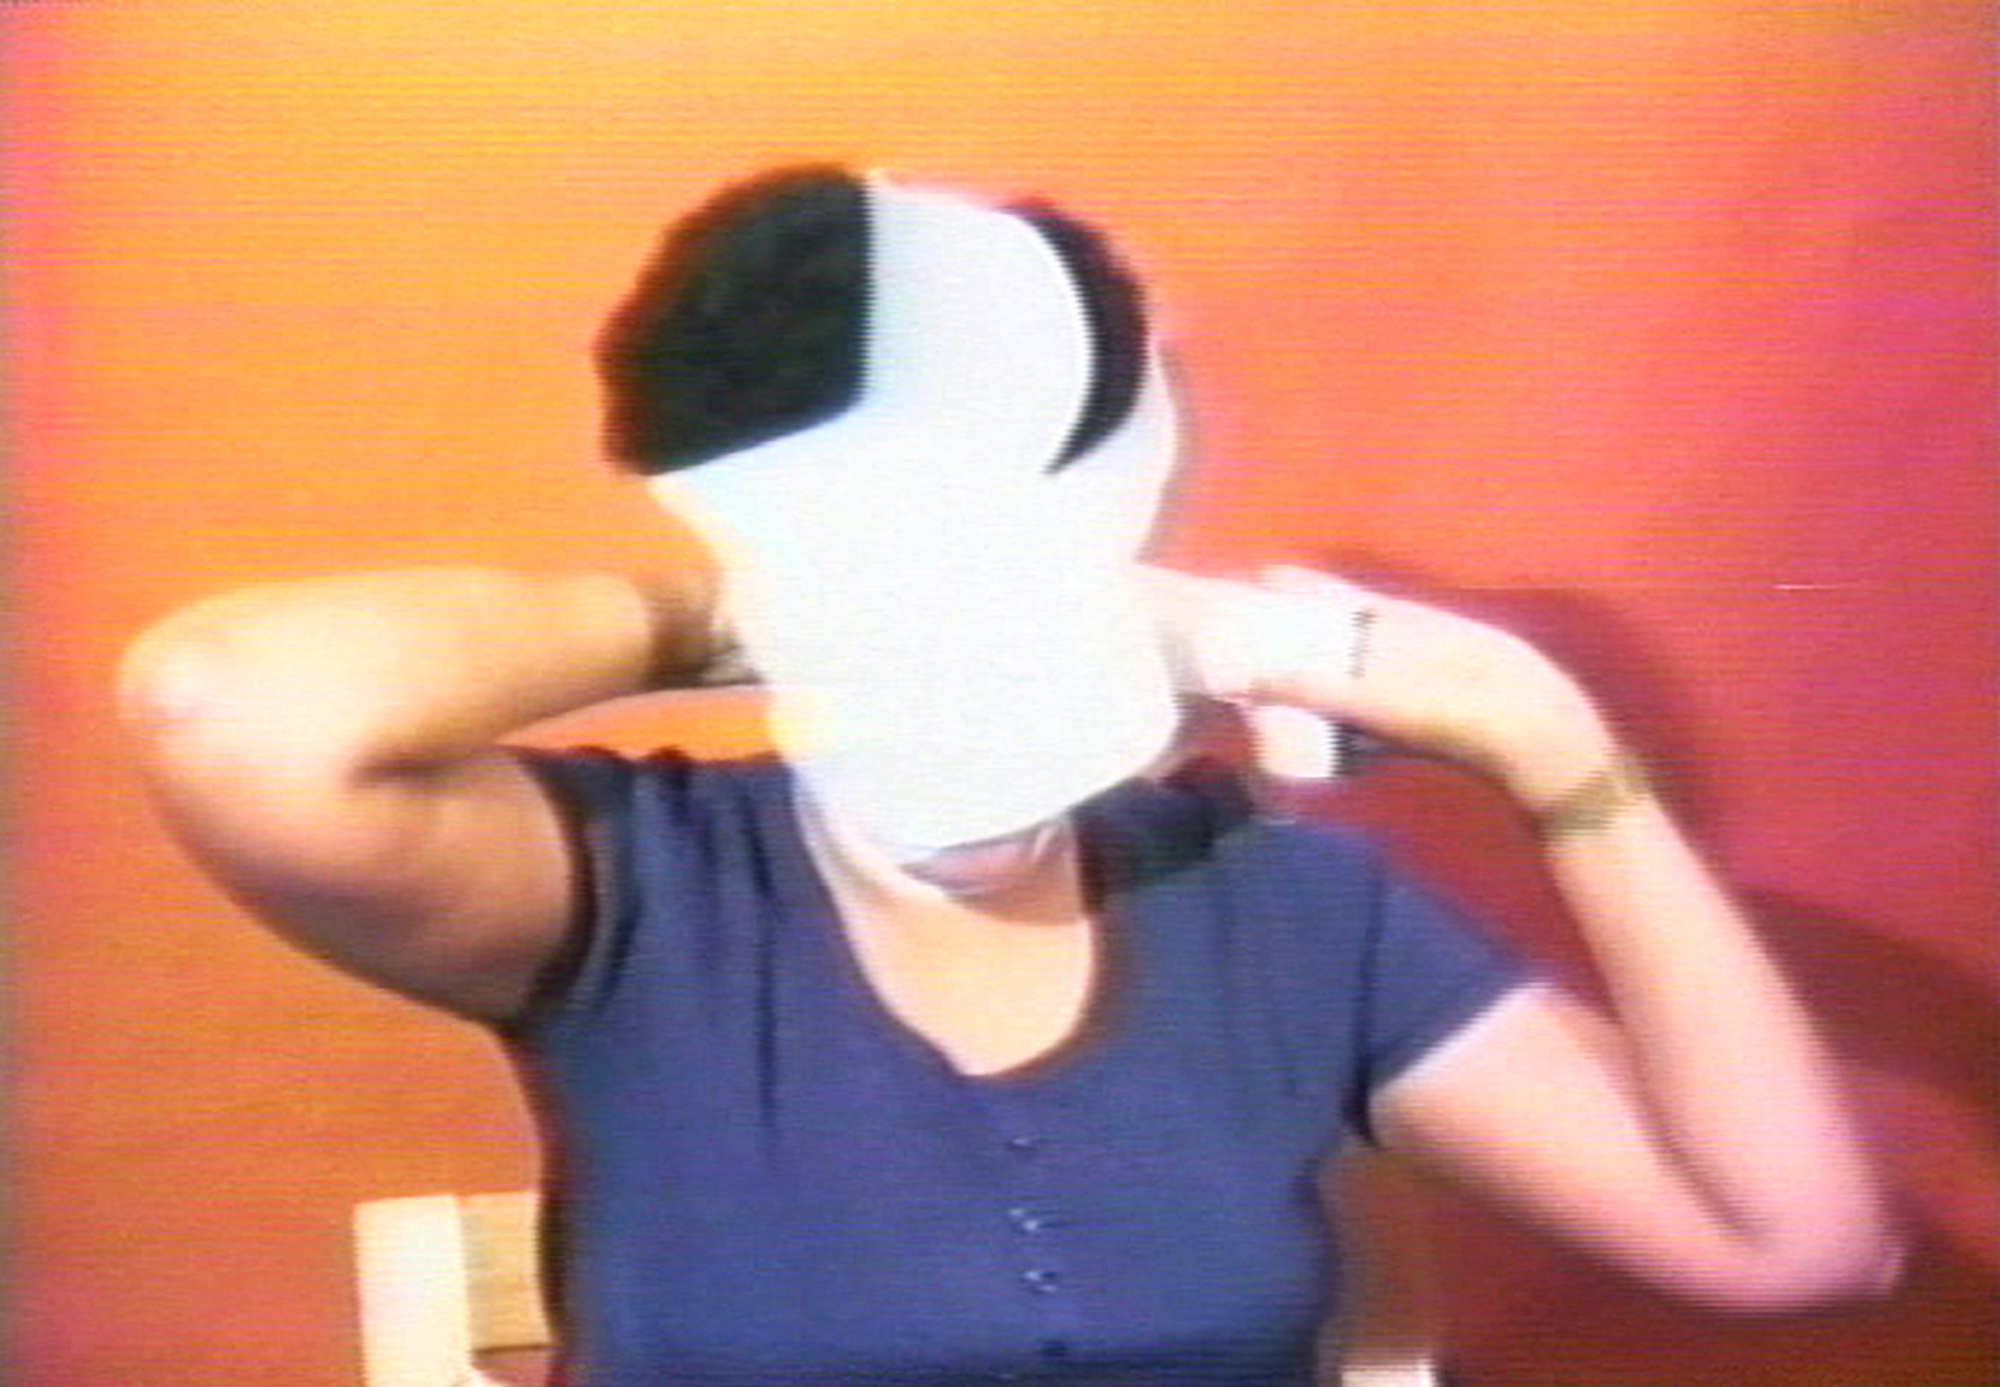 Howardena Pindell (American, born 1930). Still from Free, White and 21, 1980. Video, 12 min.15 sec. Courtesy of the artist and Garth Greenan Gallery, New York. © Howardena Pindell